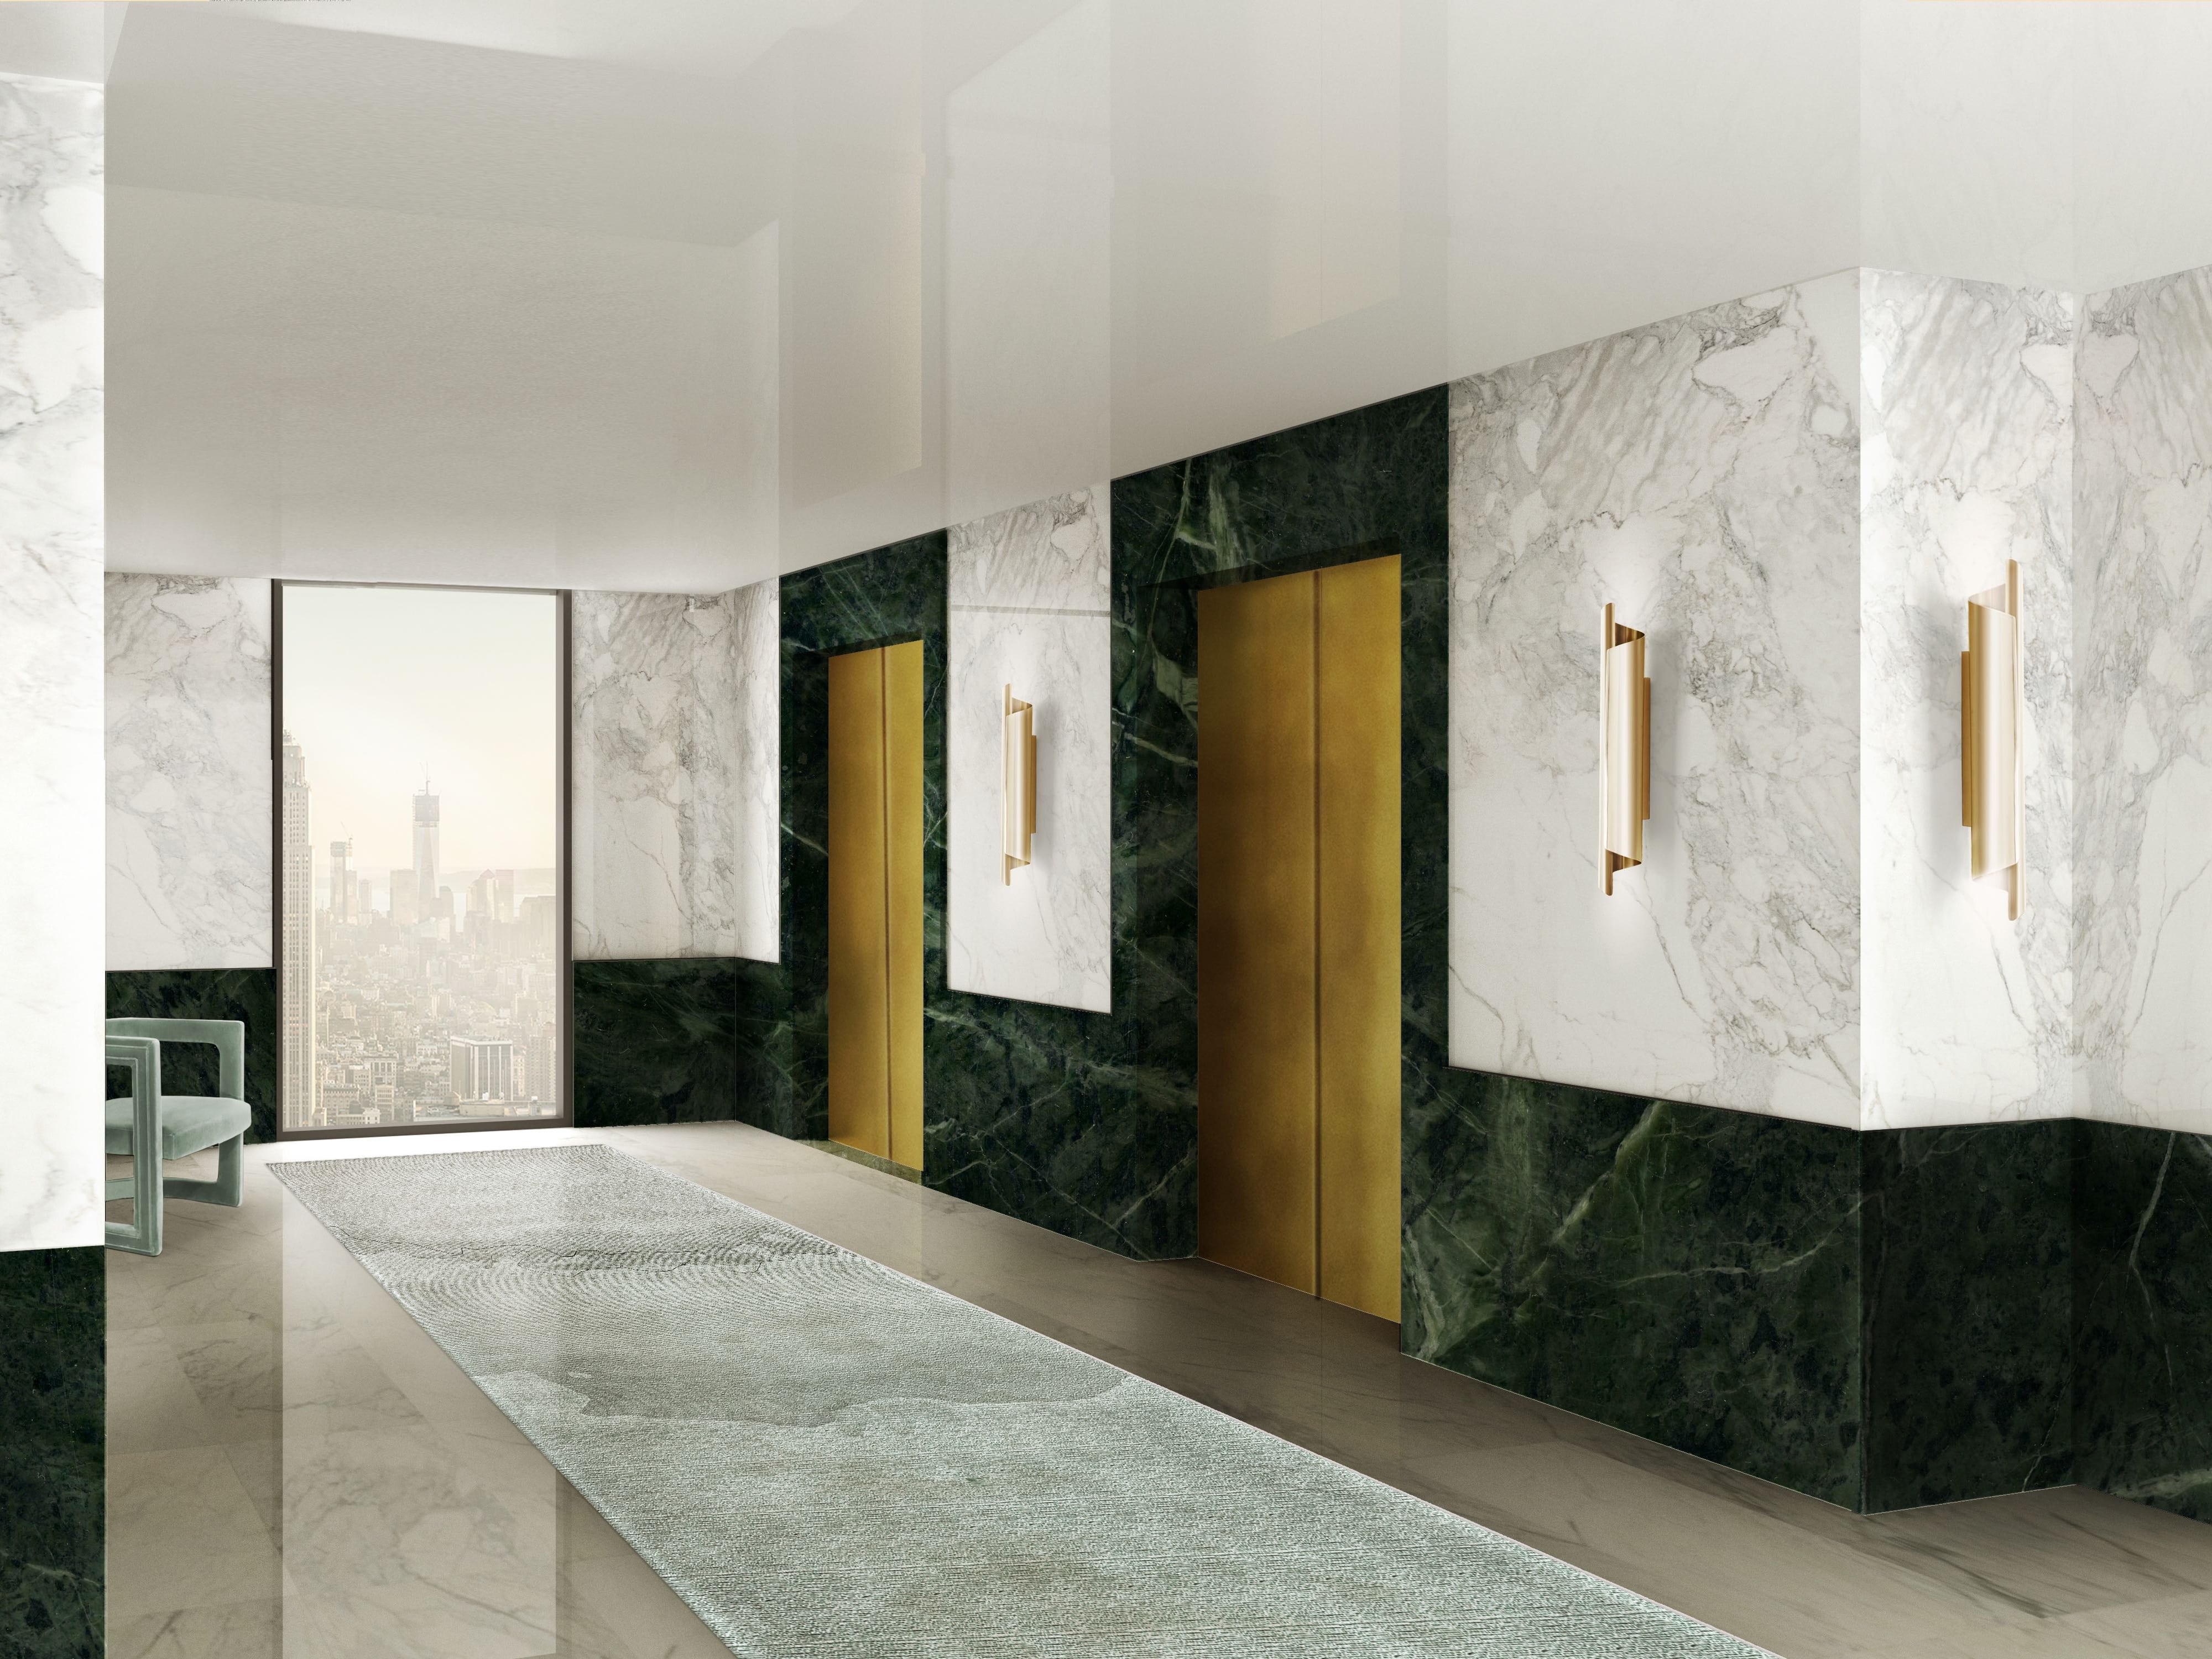 Sophisticated Hotel Design Contract With Marble And Brass Wall Light - Home'Society